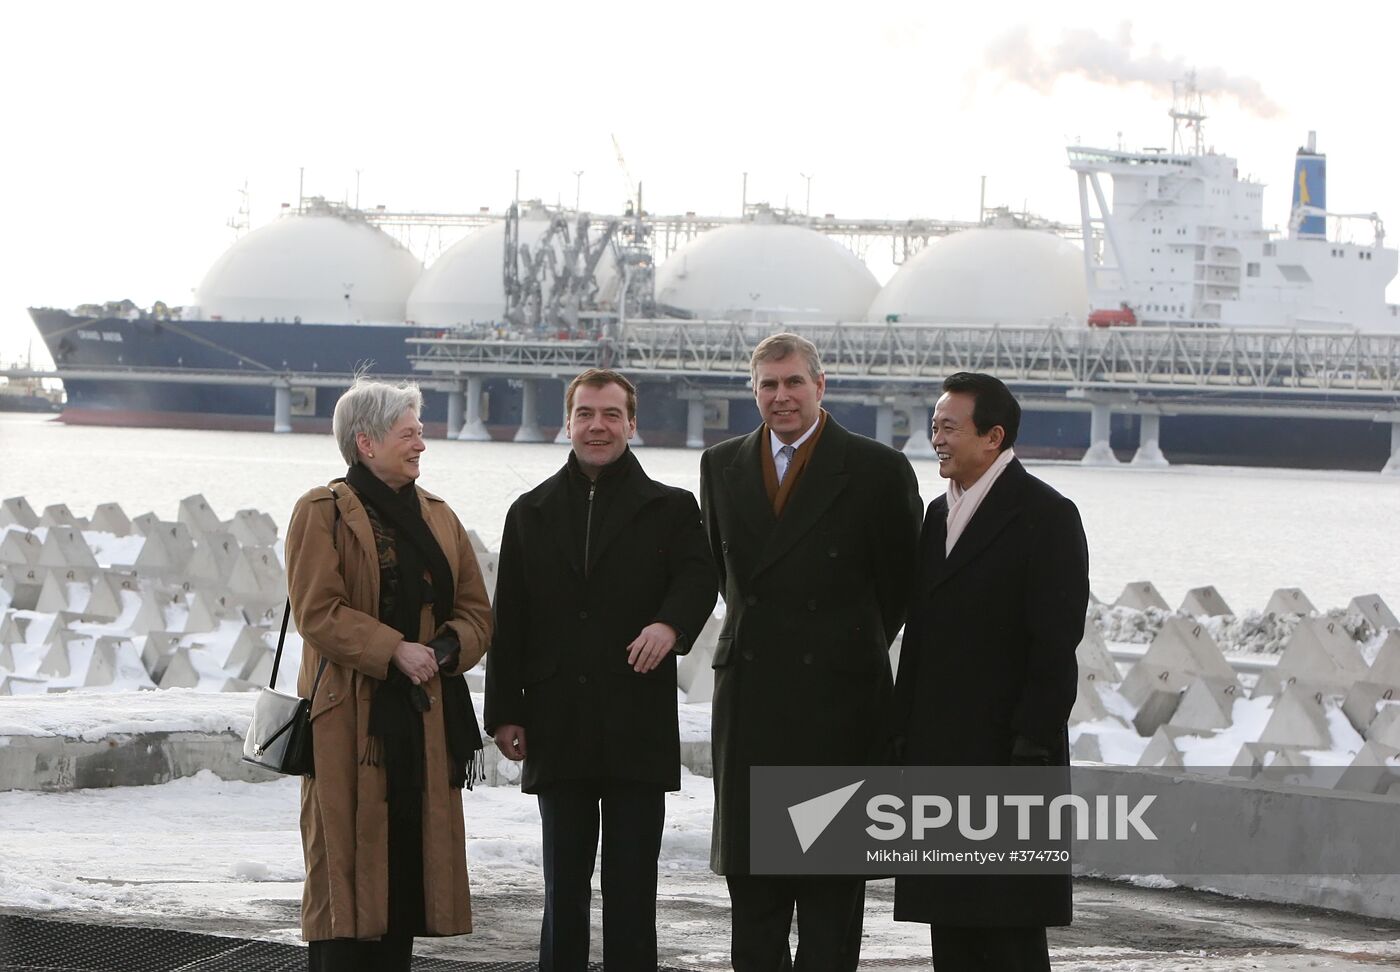 Dmitry Medvedev at opening of liquefied natural gas plant